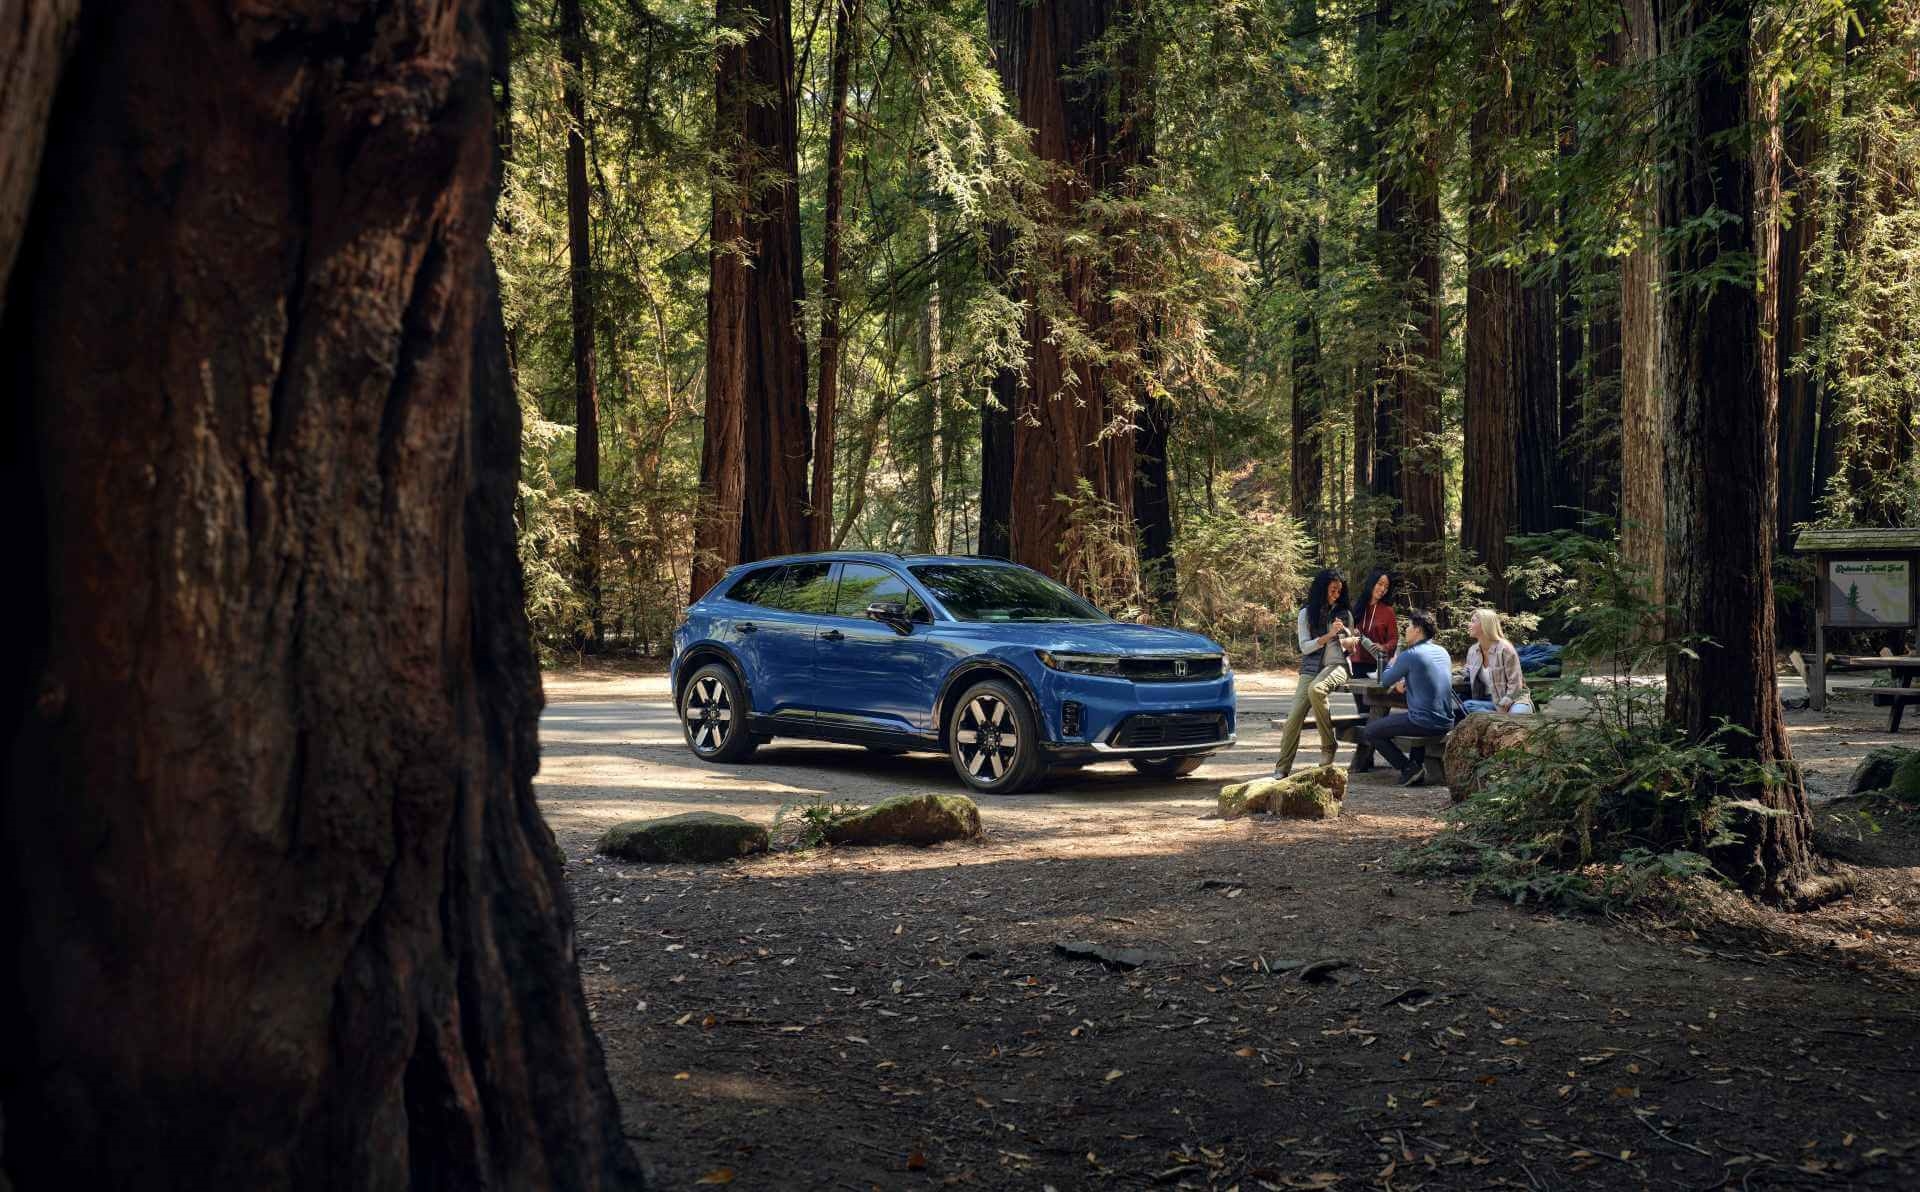 Honda Prologue on adventure in northern Californian forest within its 281 mile range